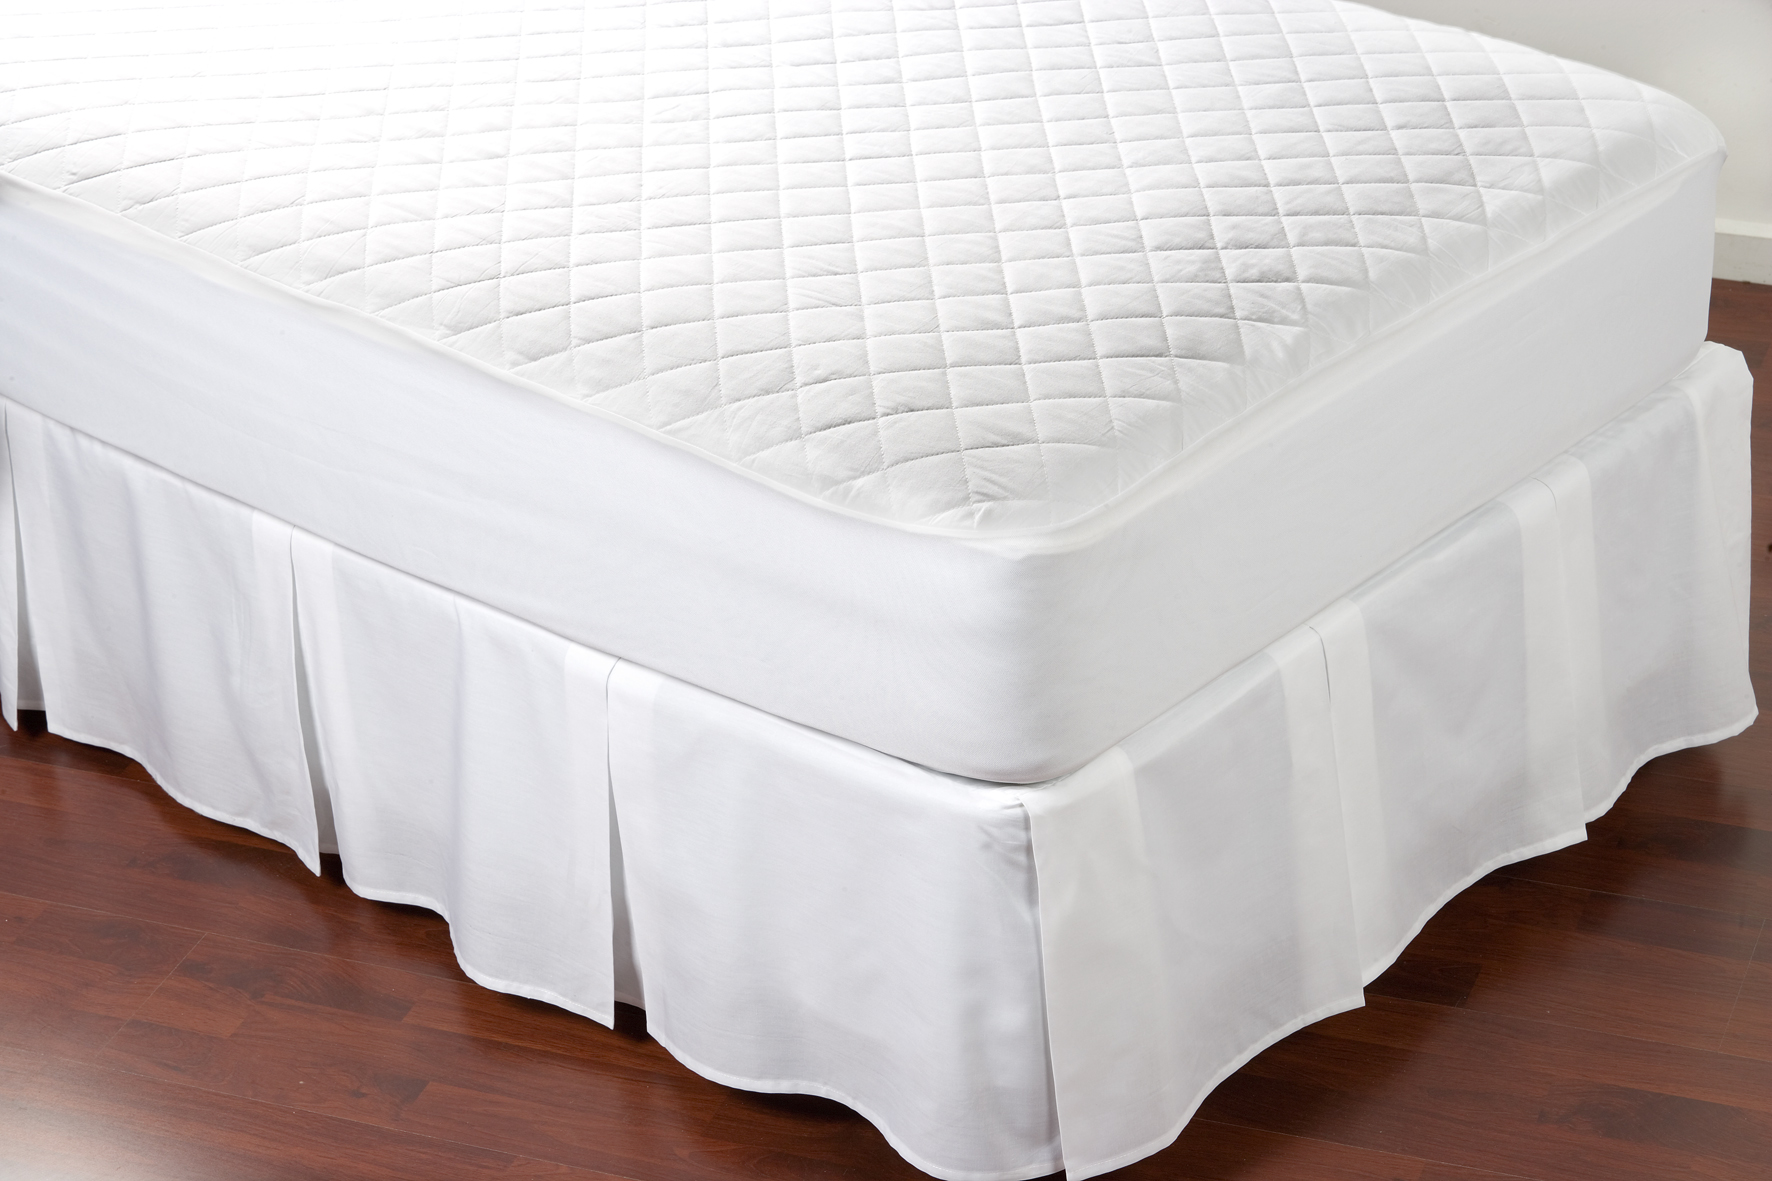 mattress protectors used in hotels